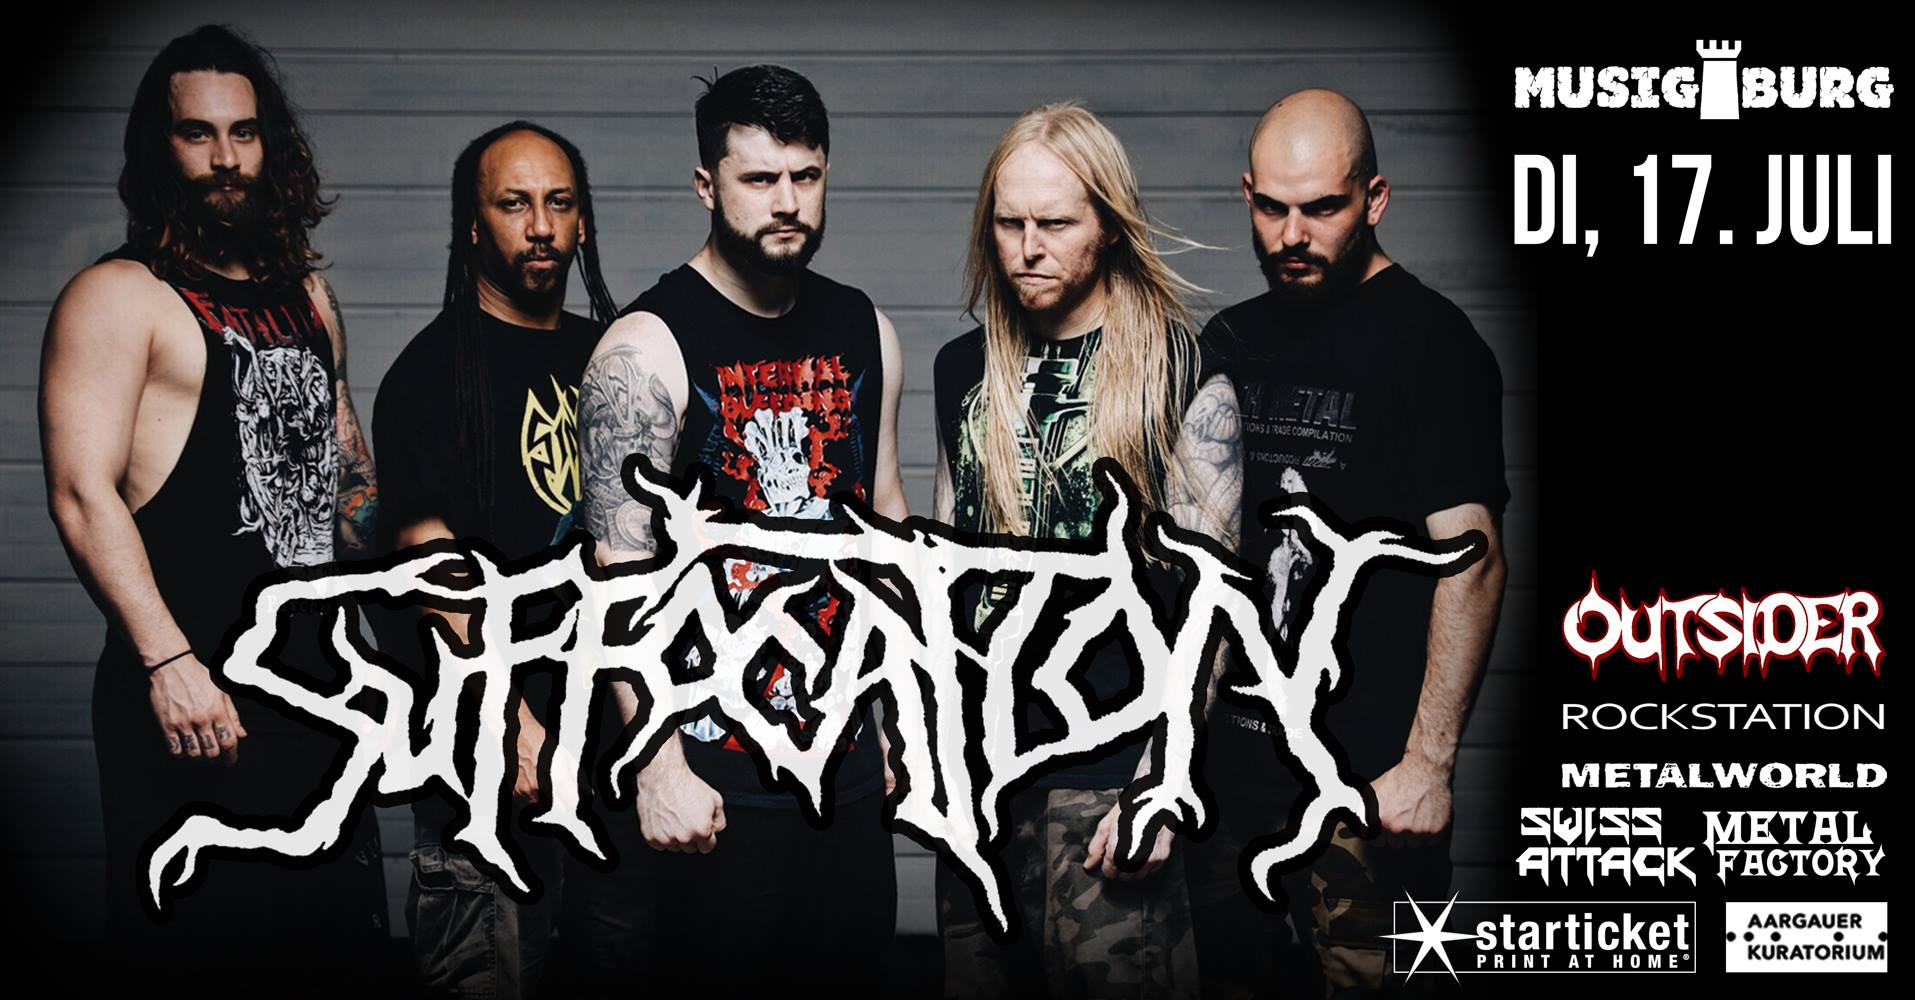 Witches flyer Suffocation + Witches @ Suffocation (Realm of Darkness European Tour: Part 2) / Witches Suffocating Summer Tour 2018 Musigburg Aarburg, Swizterland - CH